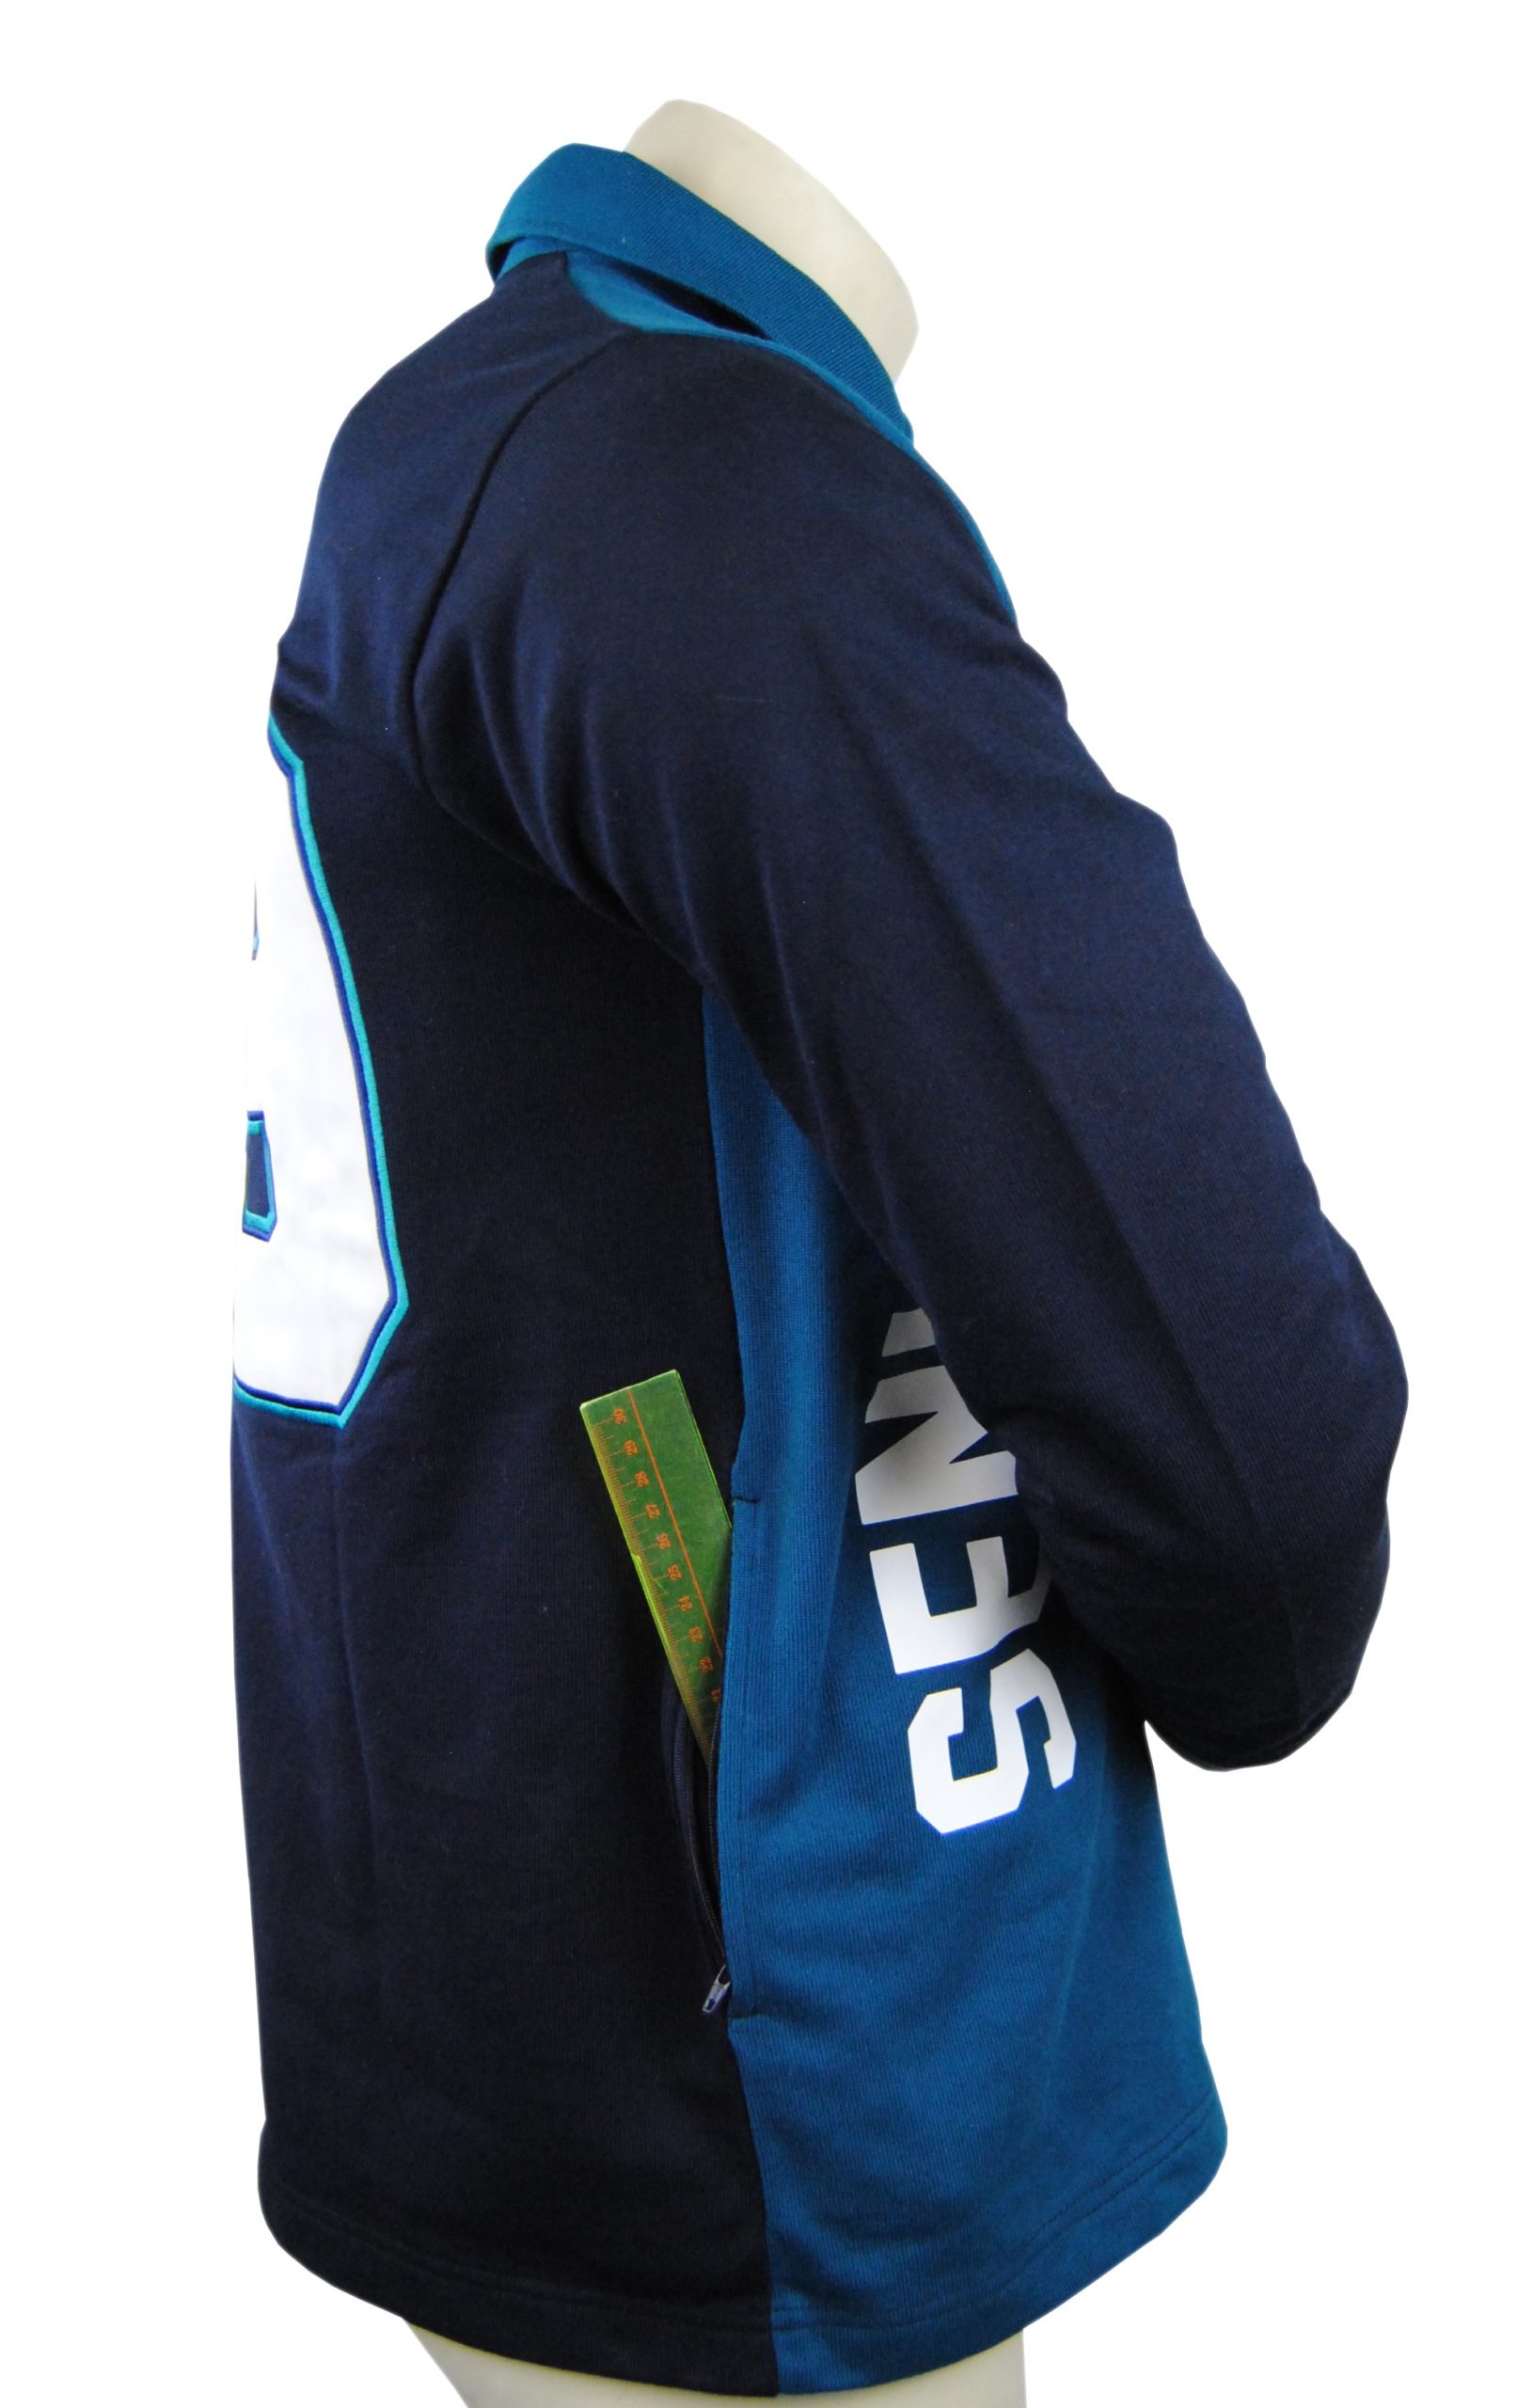 year 12 jersey with zippered pockets